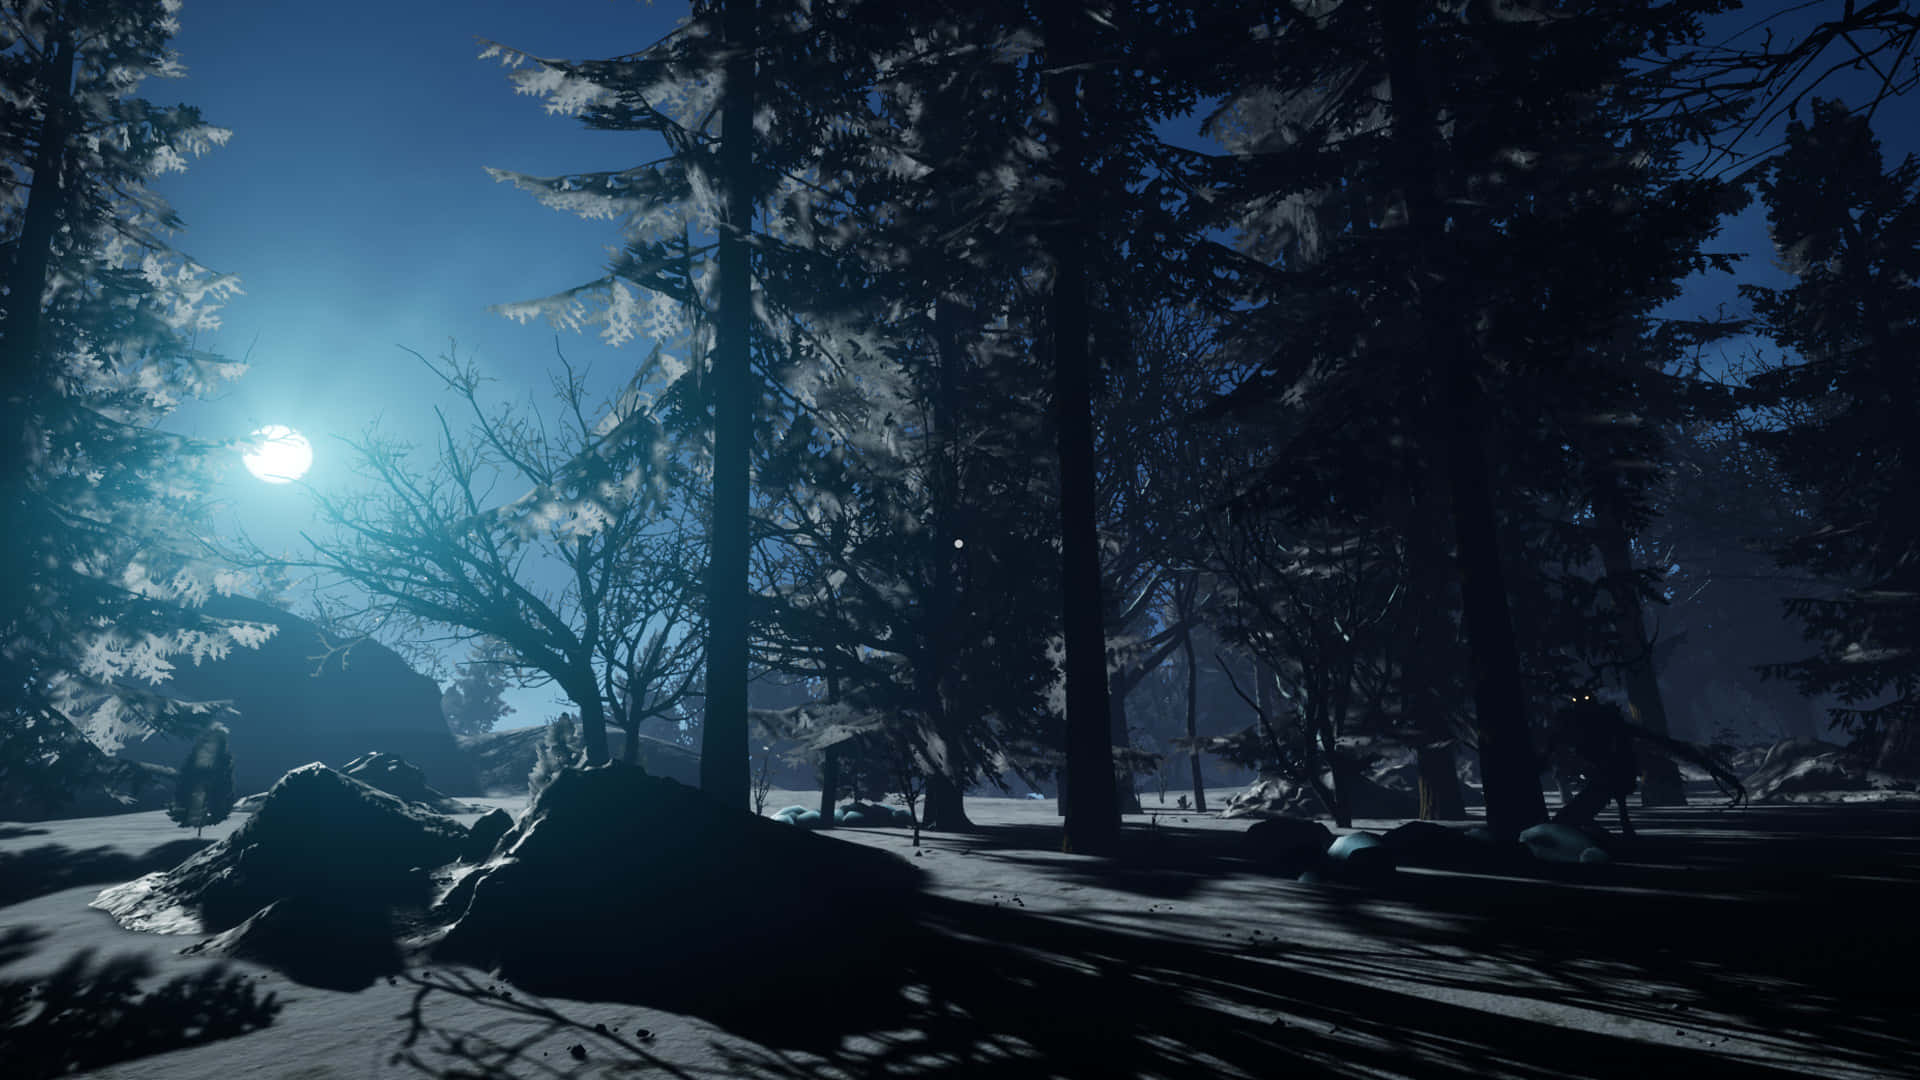 A Snowy Forest With Trees And A Moon